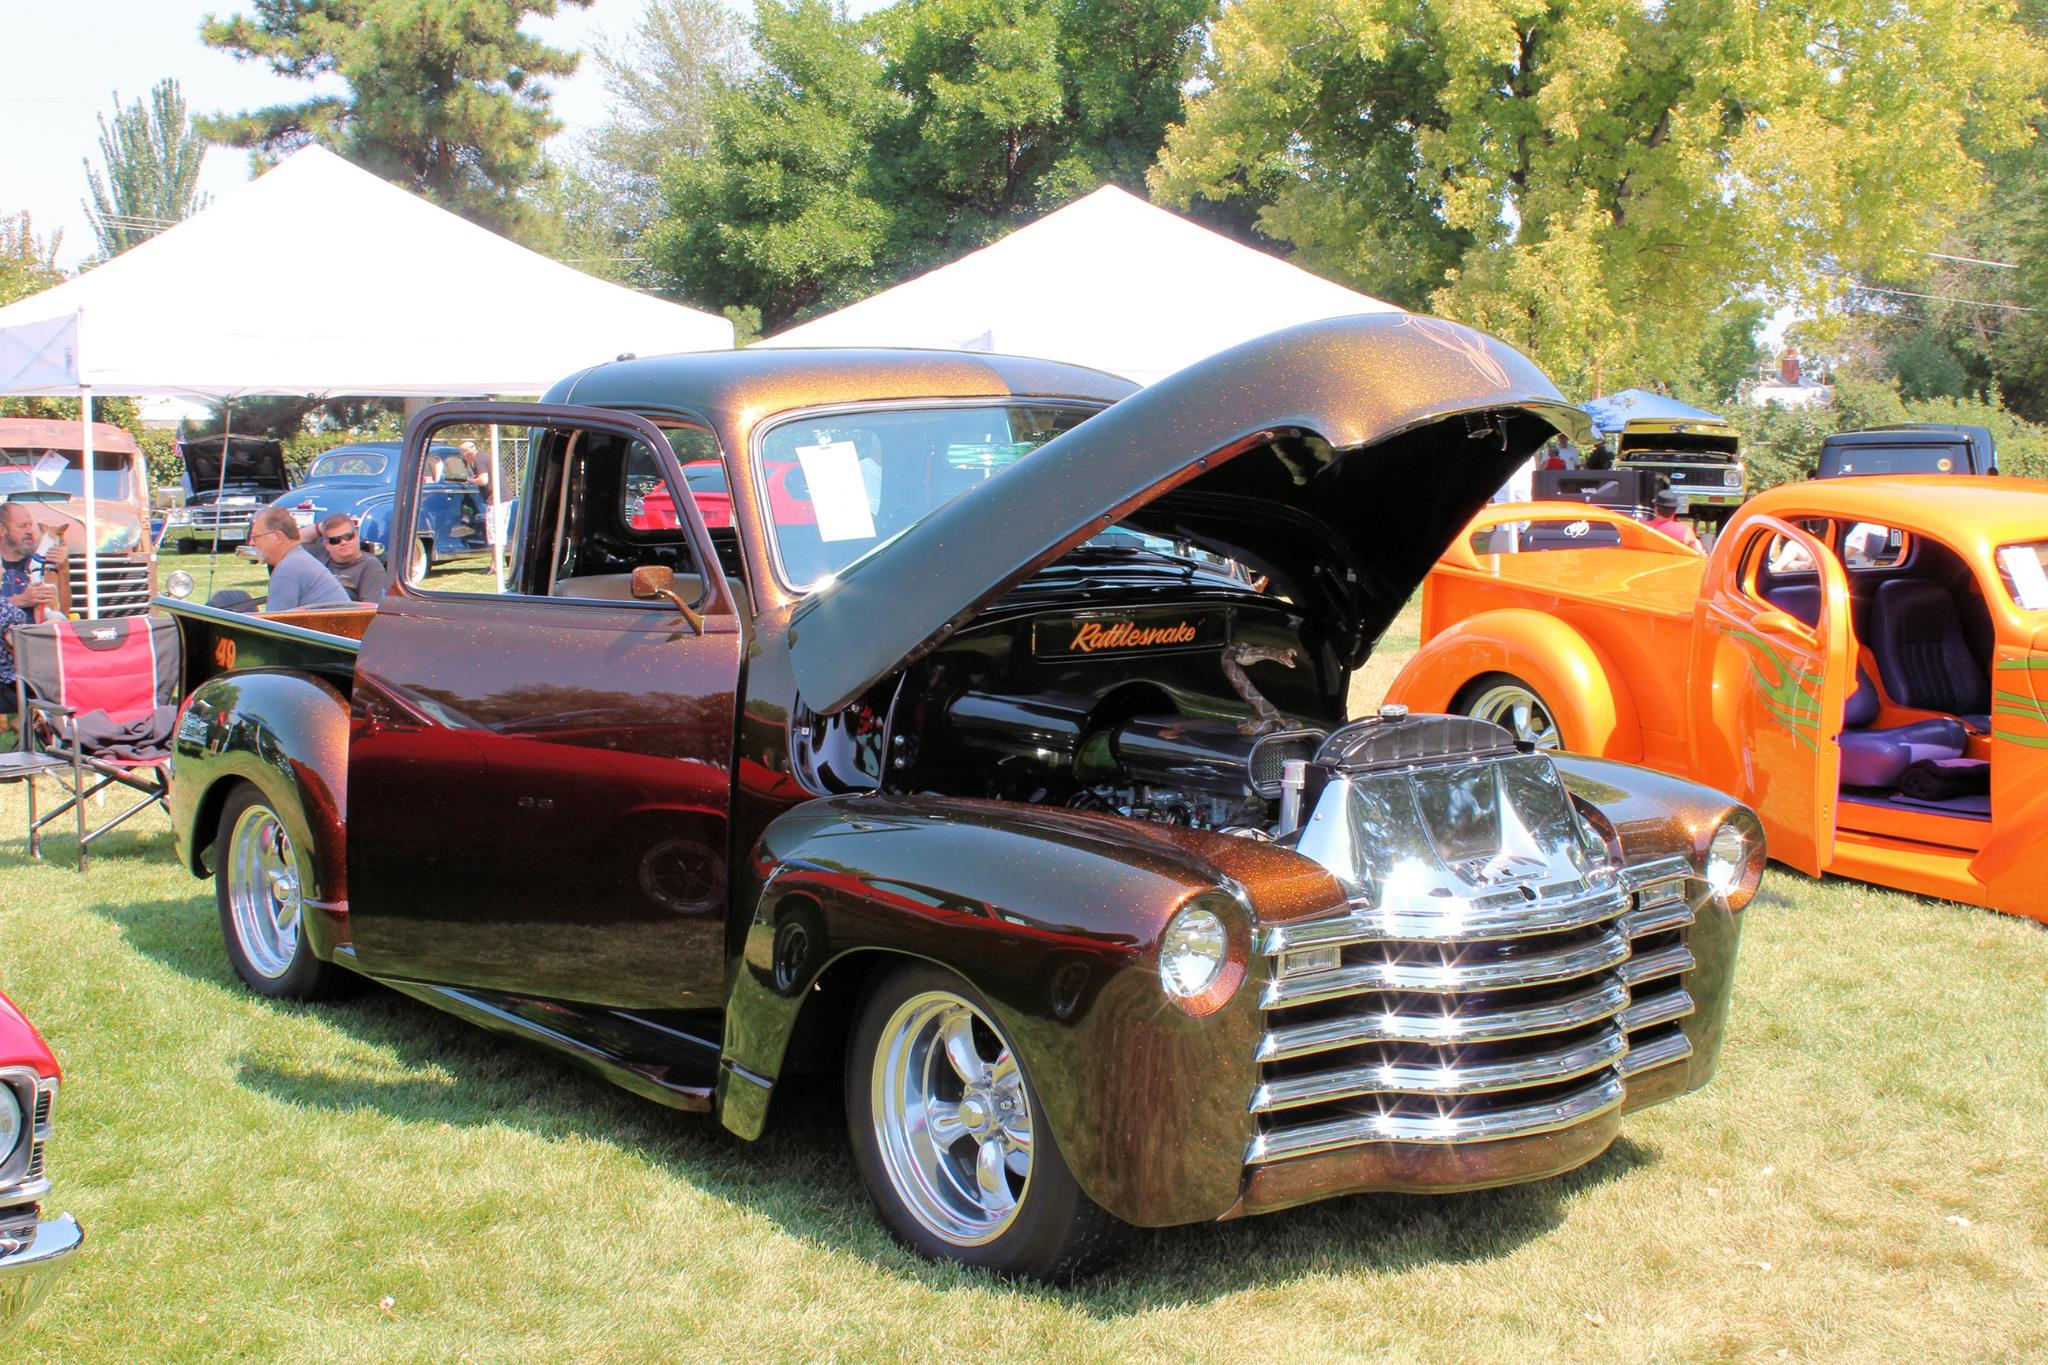 Kruisers for Kids Charity Car Show 2021